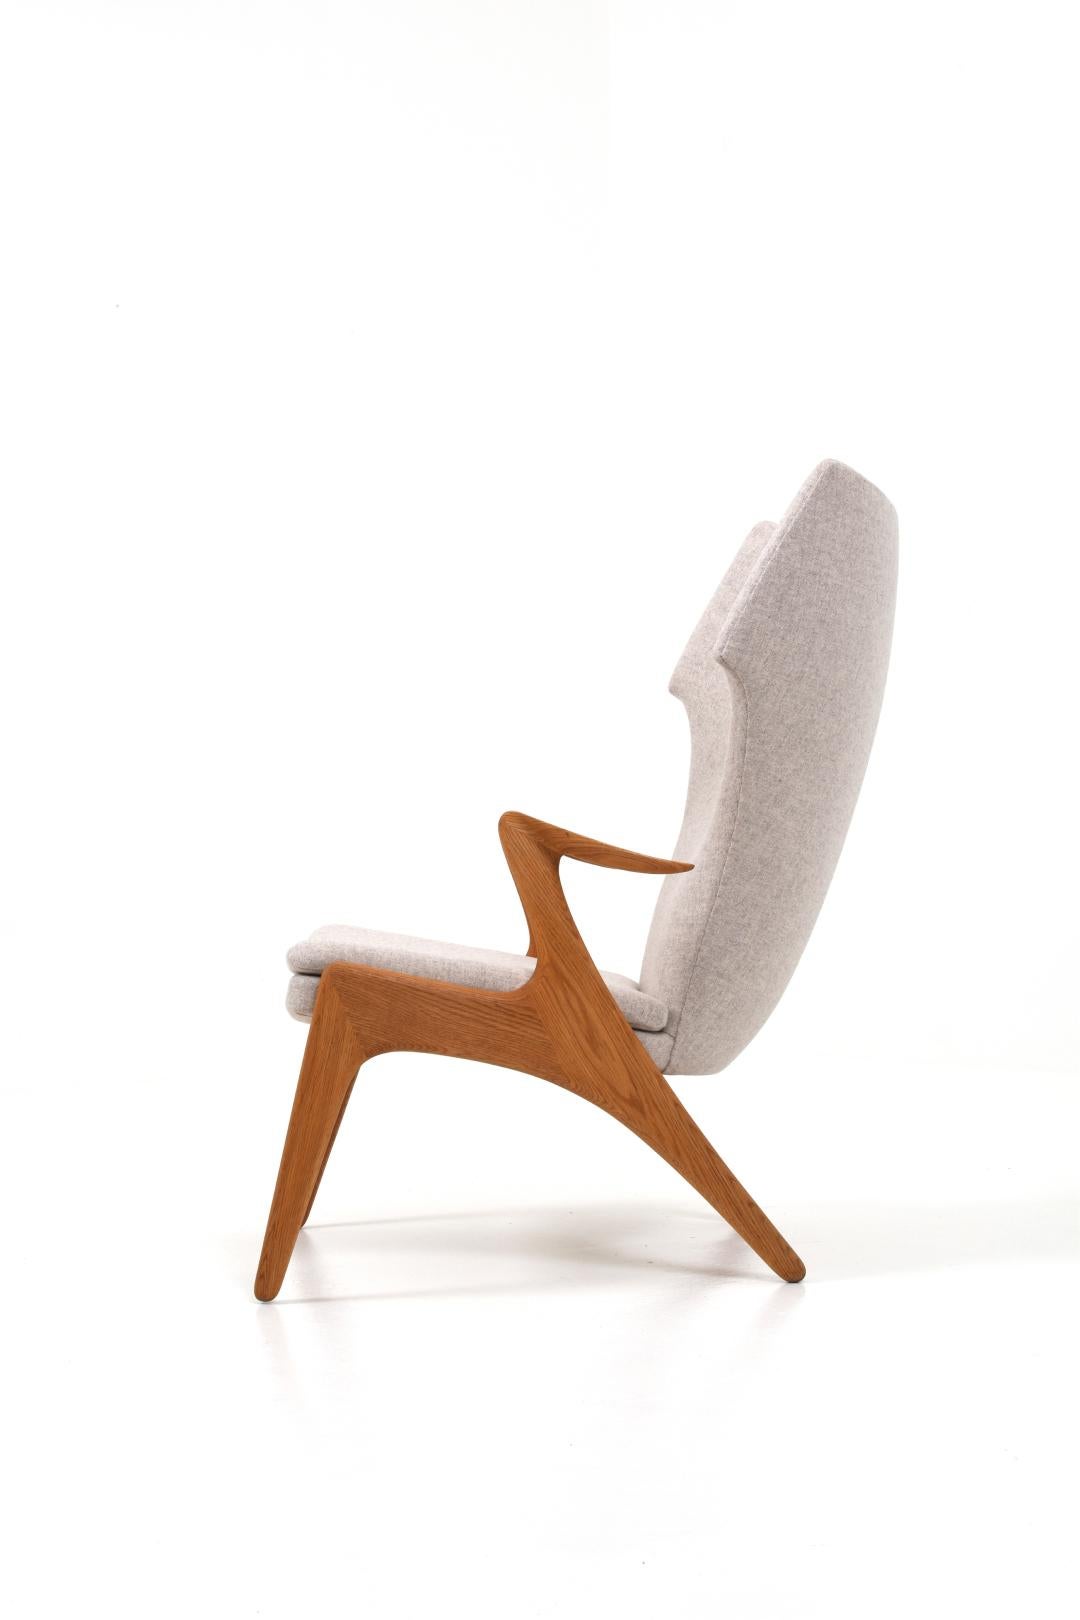 An unusual armchair by Kurt Østervig for Glostrup Møbelfabrik, Denmark.

The Danish oak wing chair by Kurt Østervig is a timeless classic that will elevate any home decor with its mid-century modern style.
Crafted from high-quality oak, this chair